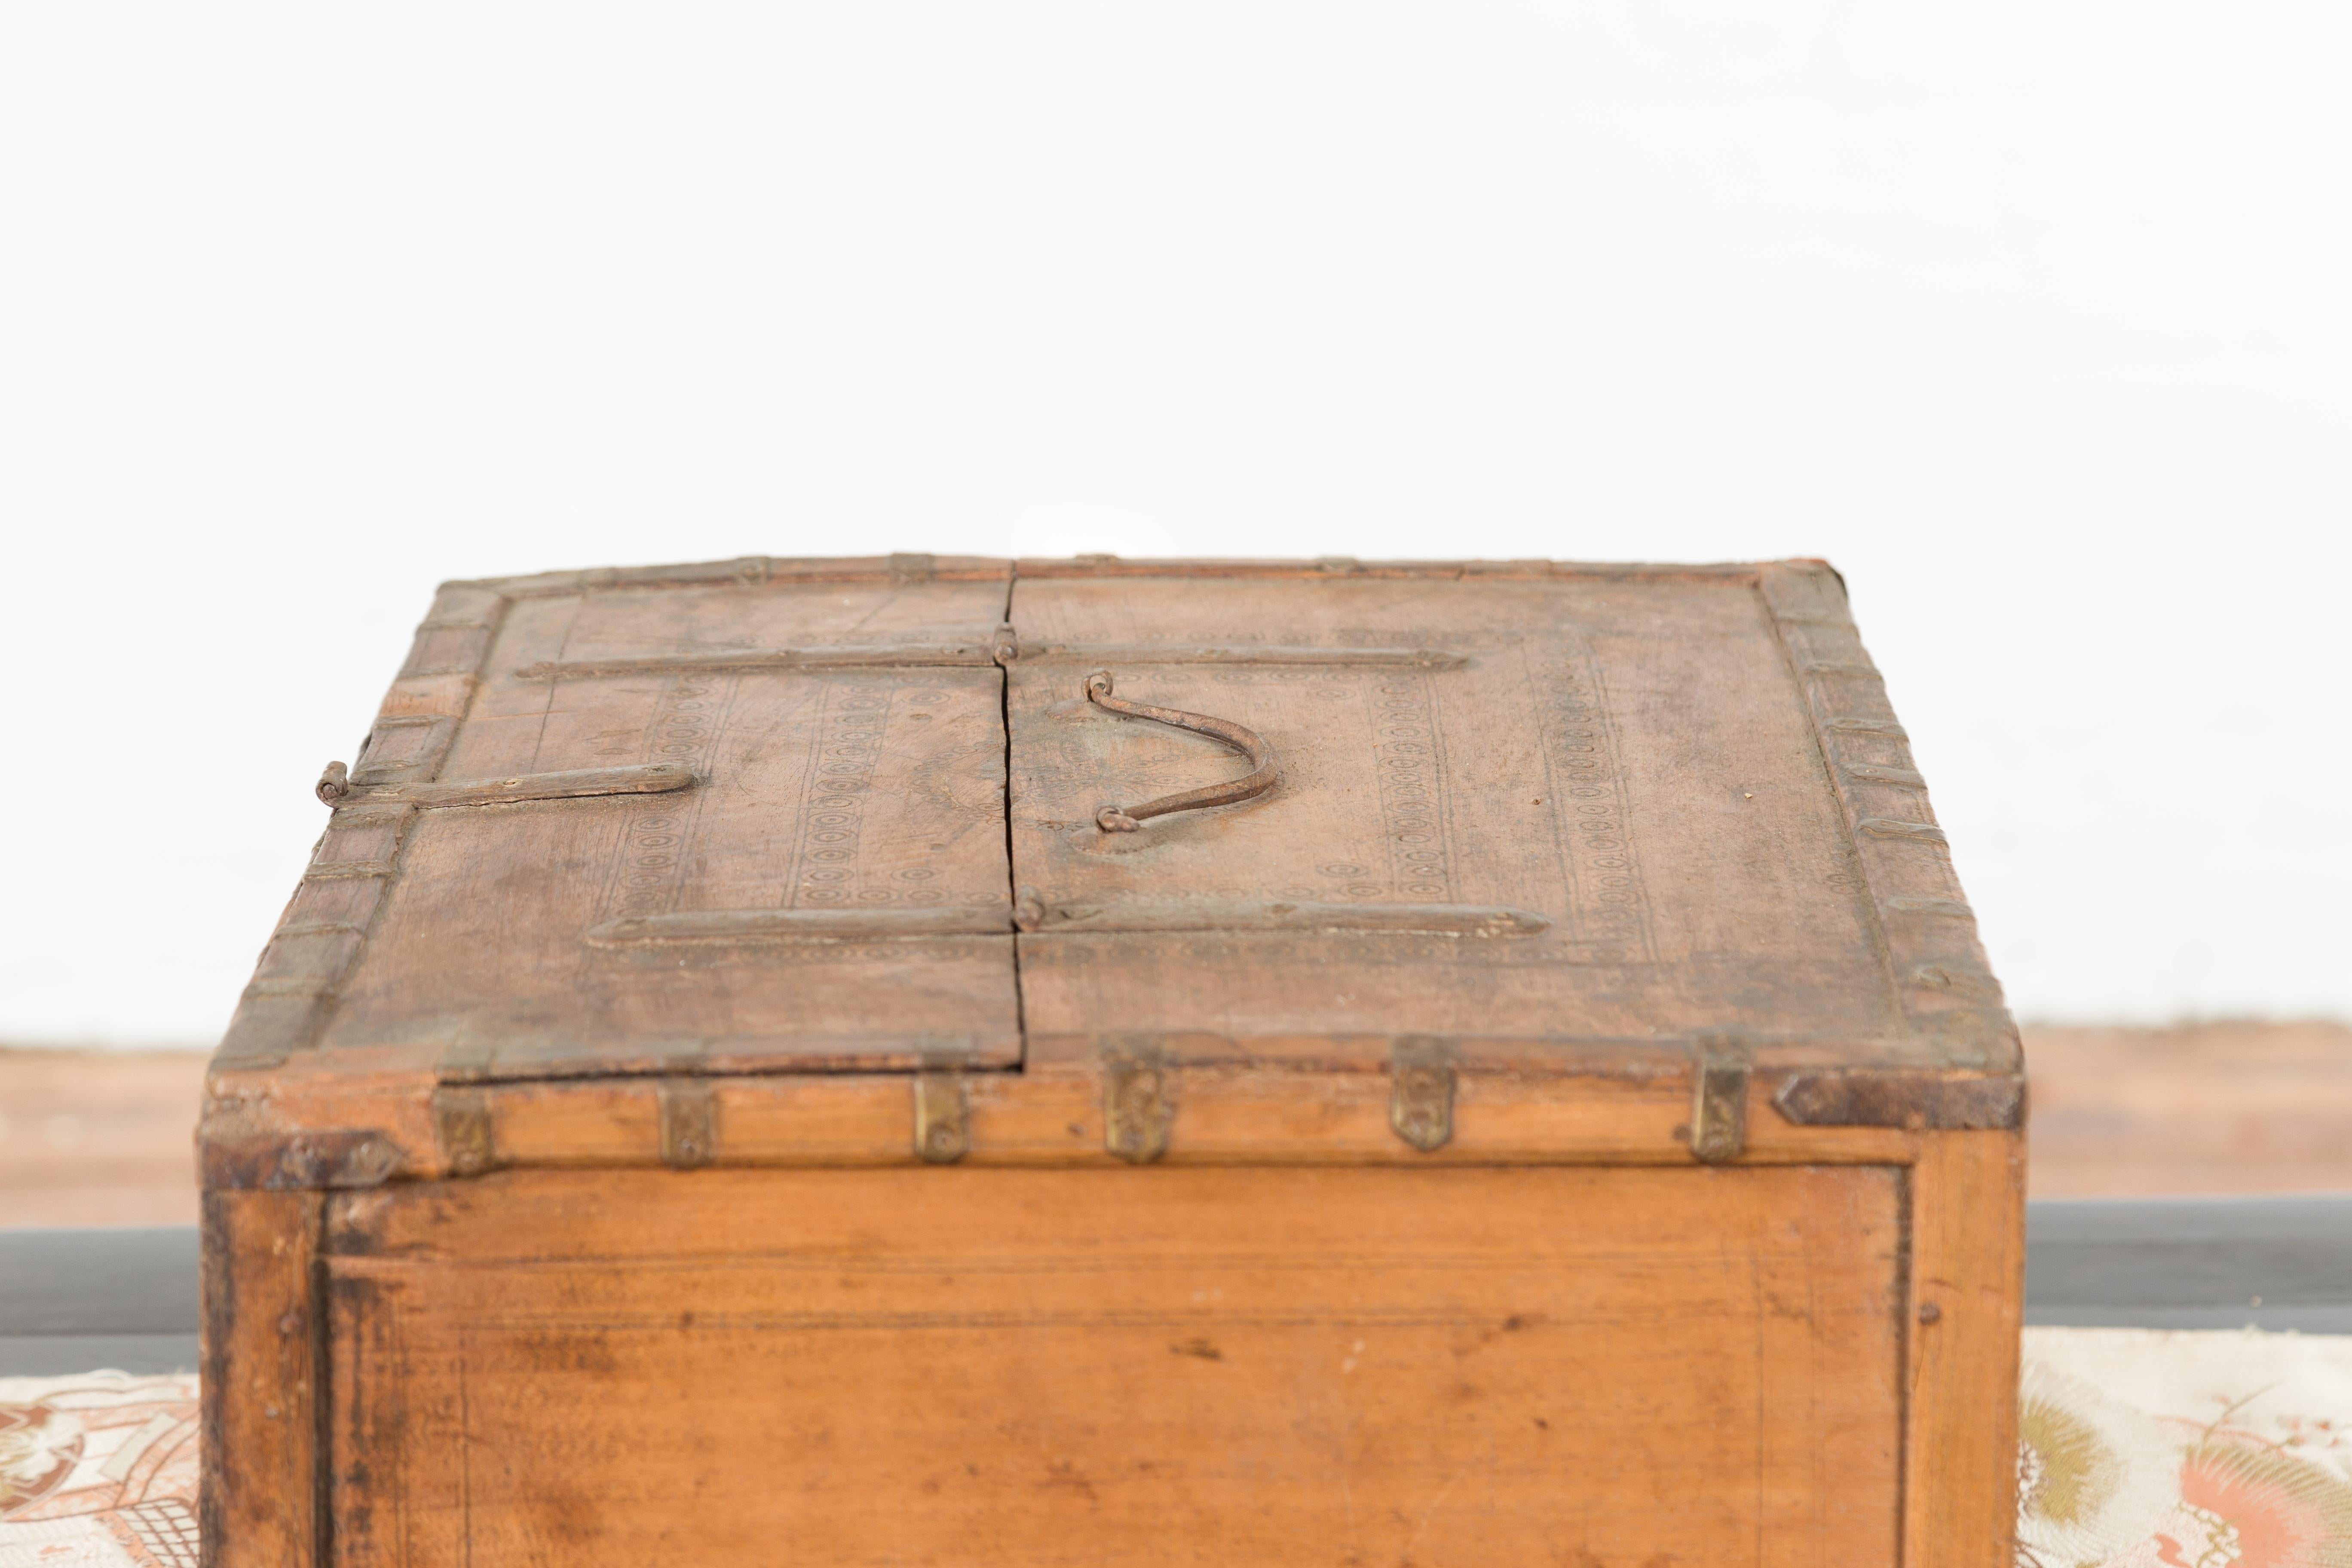 Rustic Indian 19th Century Wooden Box with Iron Details and Concentric Circles For Sale 6